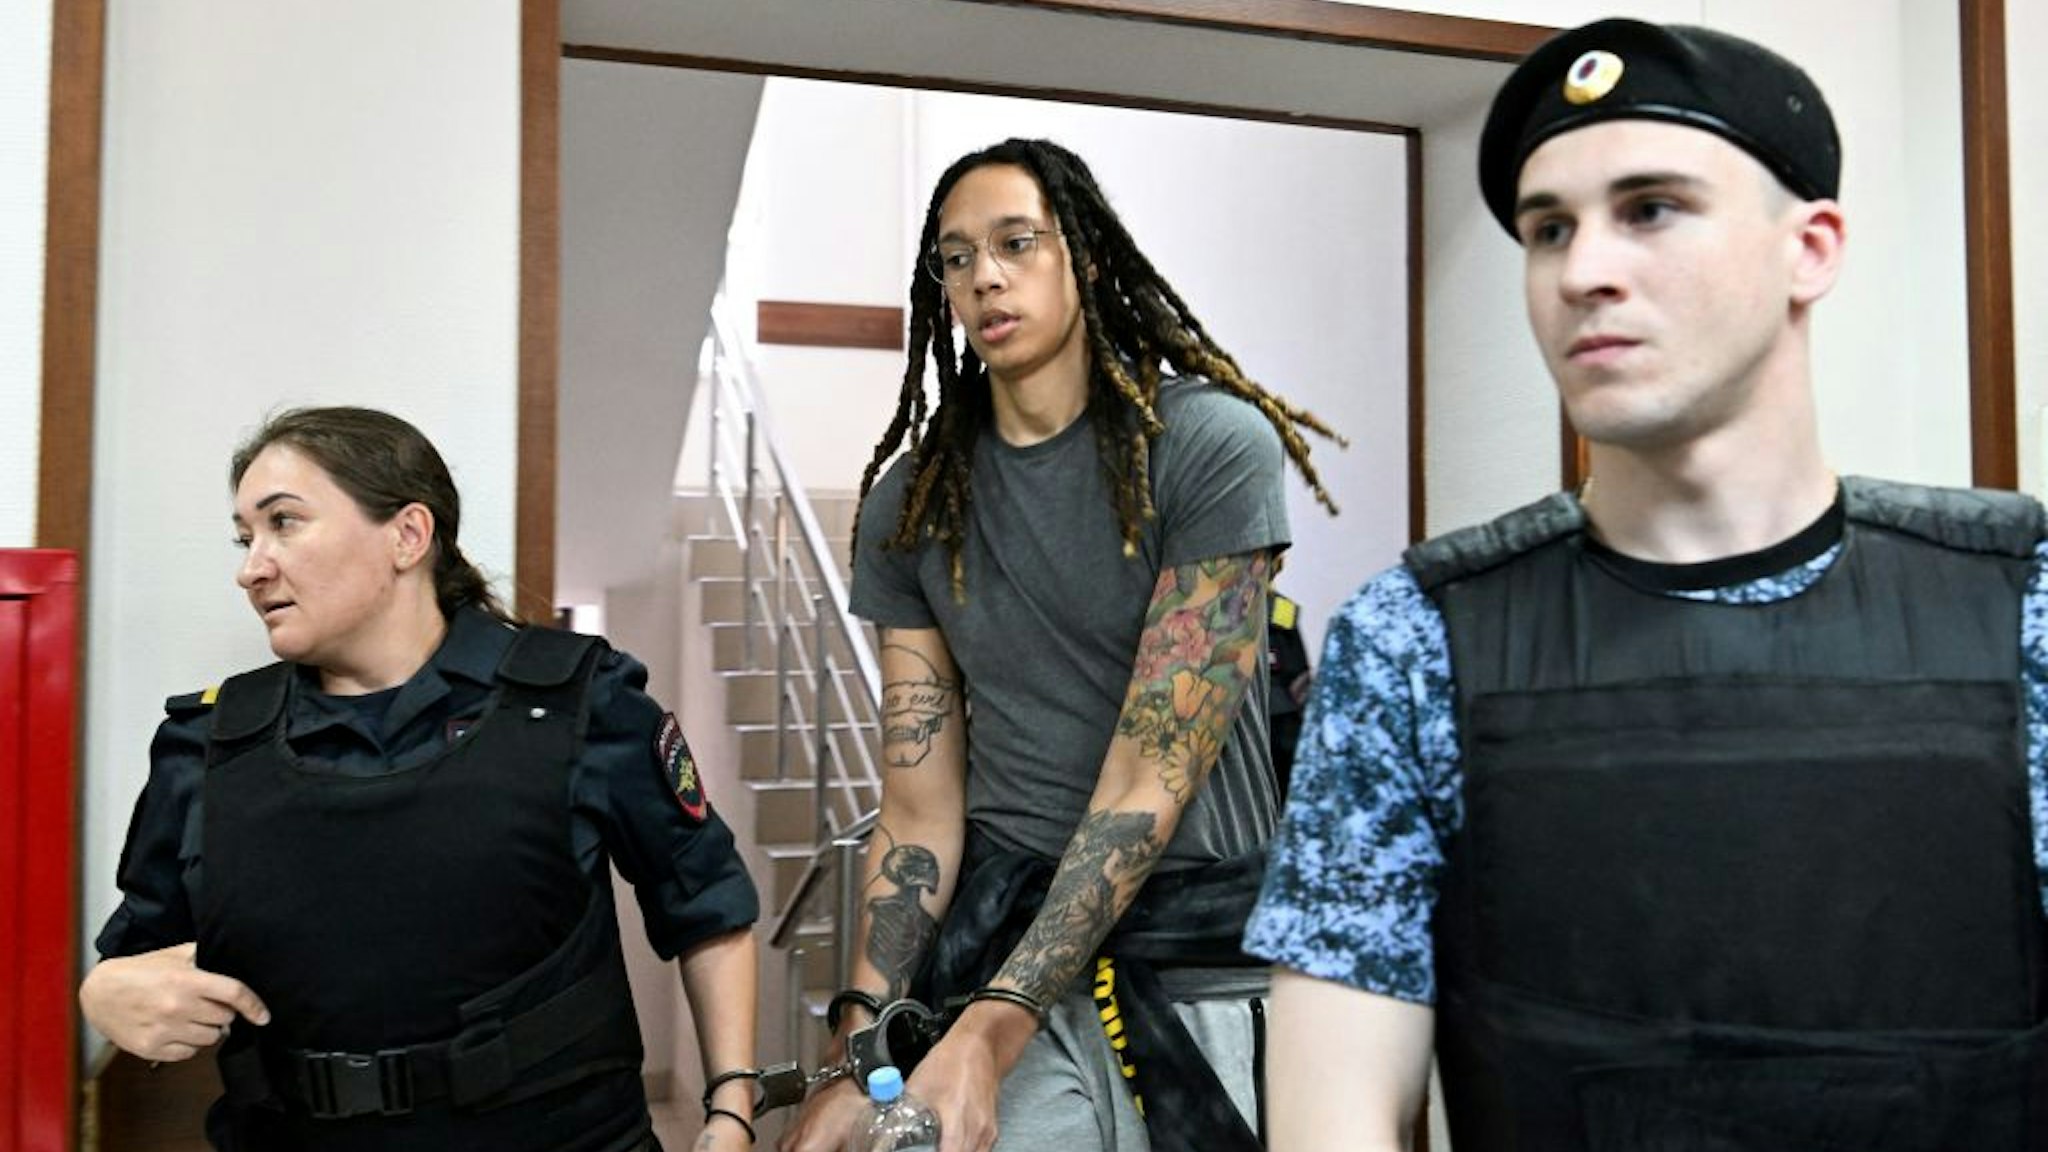 TOPSHOT - US WNBA basketball superstar Brittney Griner arrives to a hearing at the Khimki Court, outside Moscow on June 27, 2022. - Griner, a two-time Olympic gold medallist and WNBA champion, was detained at Moscow airport in February on charges of carrying in her luggage vape cartridges with cannabis oil, which could carry a 10-year prison sentence. (Photo by Kirill KUDRYAVTSEV / AFP) (Photo by KIRILL KUDRYAVTSEV/AFP via Getty Images)